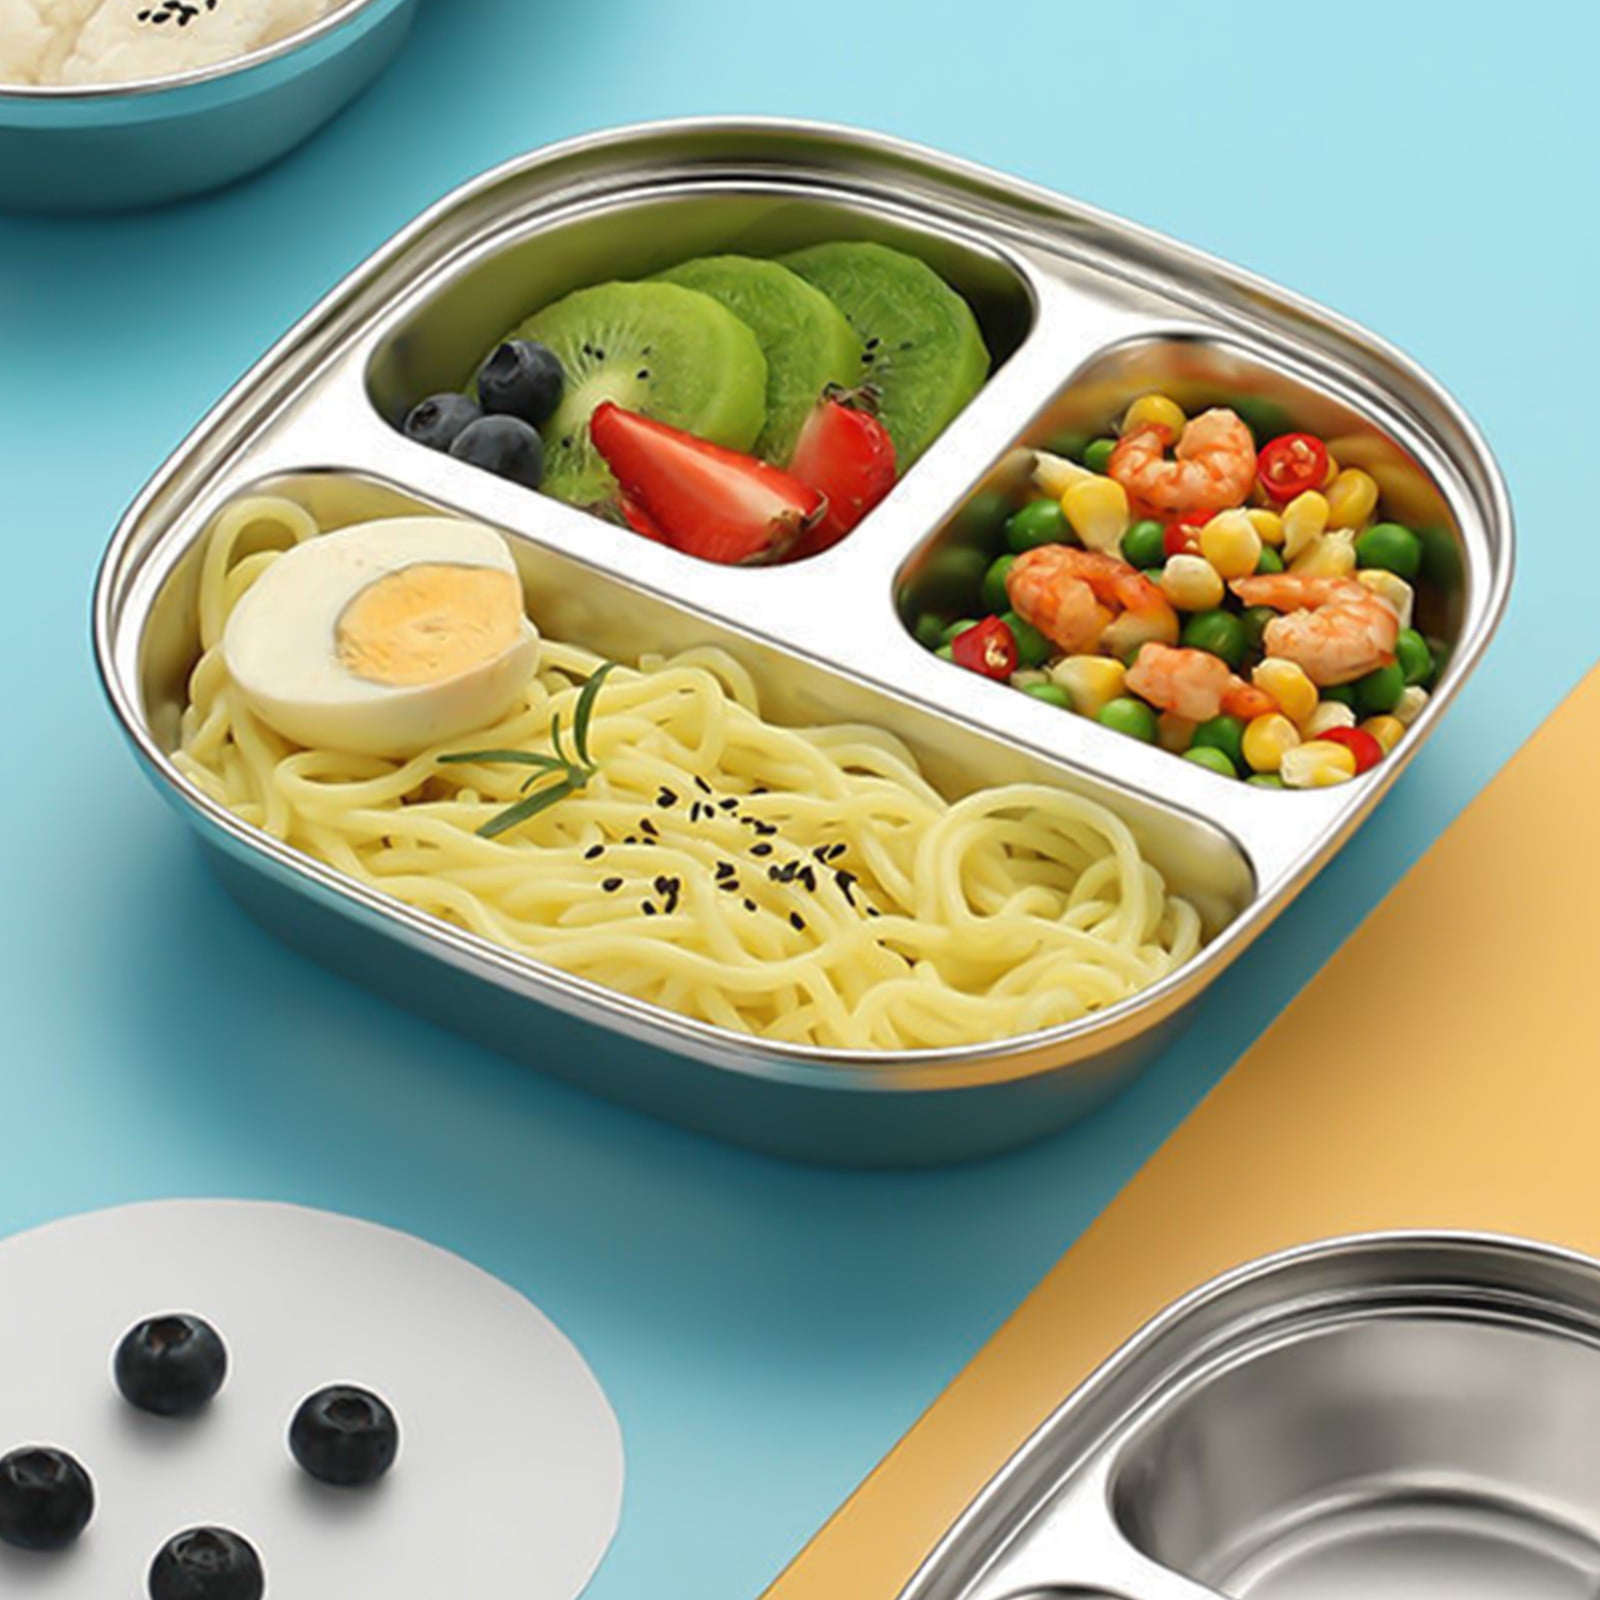 Aohea Microwave Safe Bento Box in School Home Office Use Lunch Box